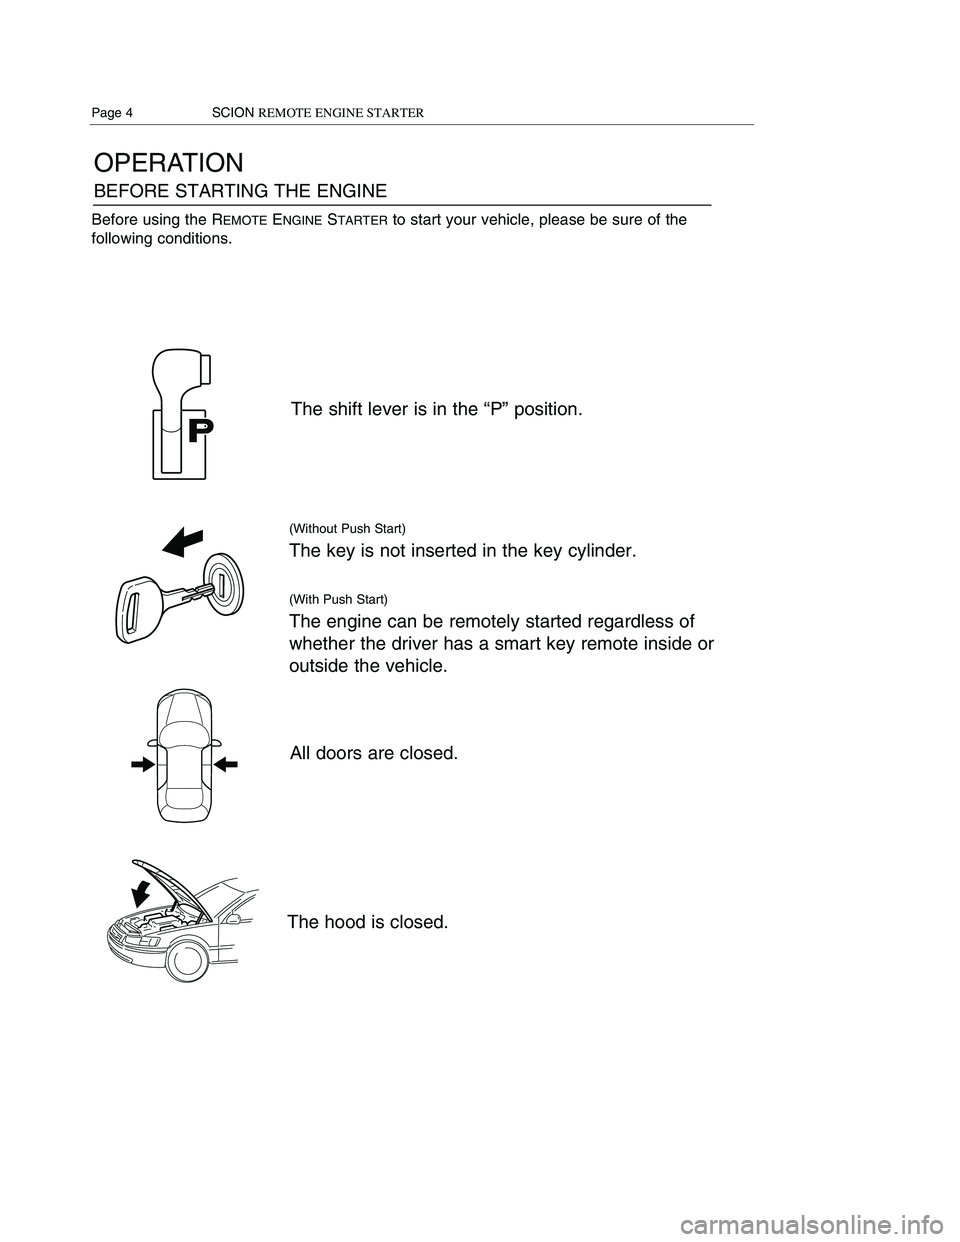 TOYOTA xD 2011  Accessories, Audio & Navigation (in English) 
OPERATION
BEFORE STARTING THE ENGINE
The shift lever is in the “P” position.
(Without Push Start)
The key is not inserted in the key cylinder.
(With Push Start)
The engine can be remotely started